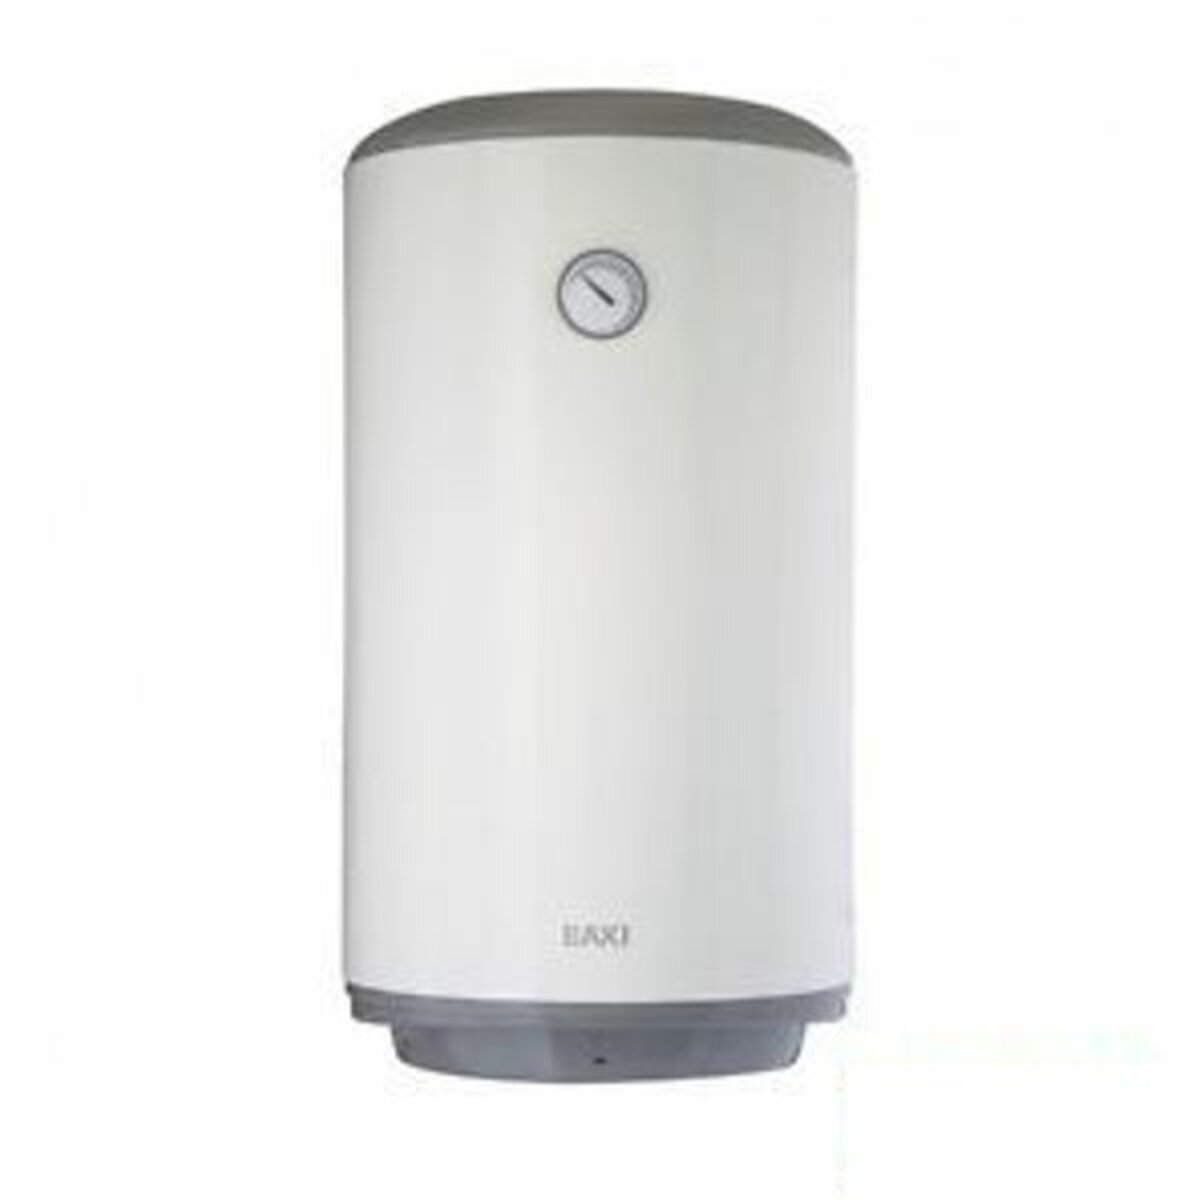 Electric water heater Must + line Baxi v550 50 liters 2 years